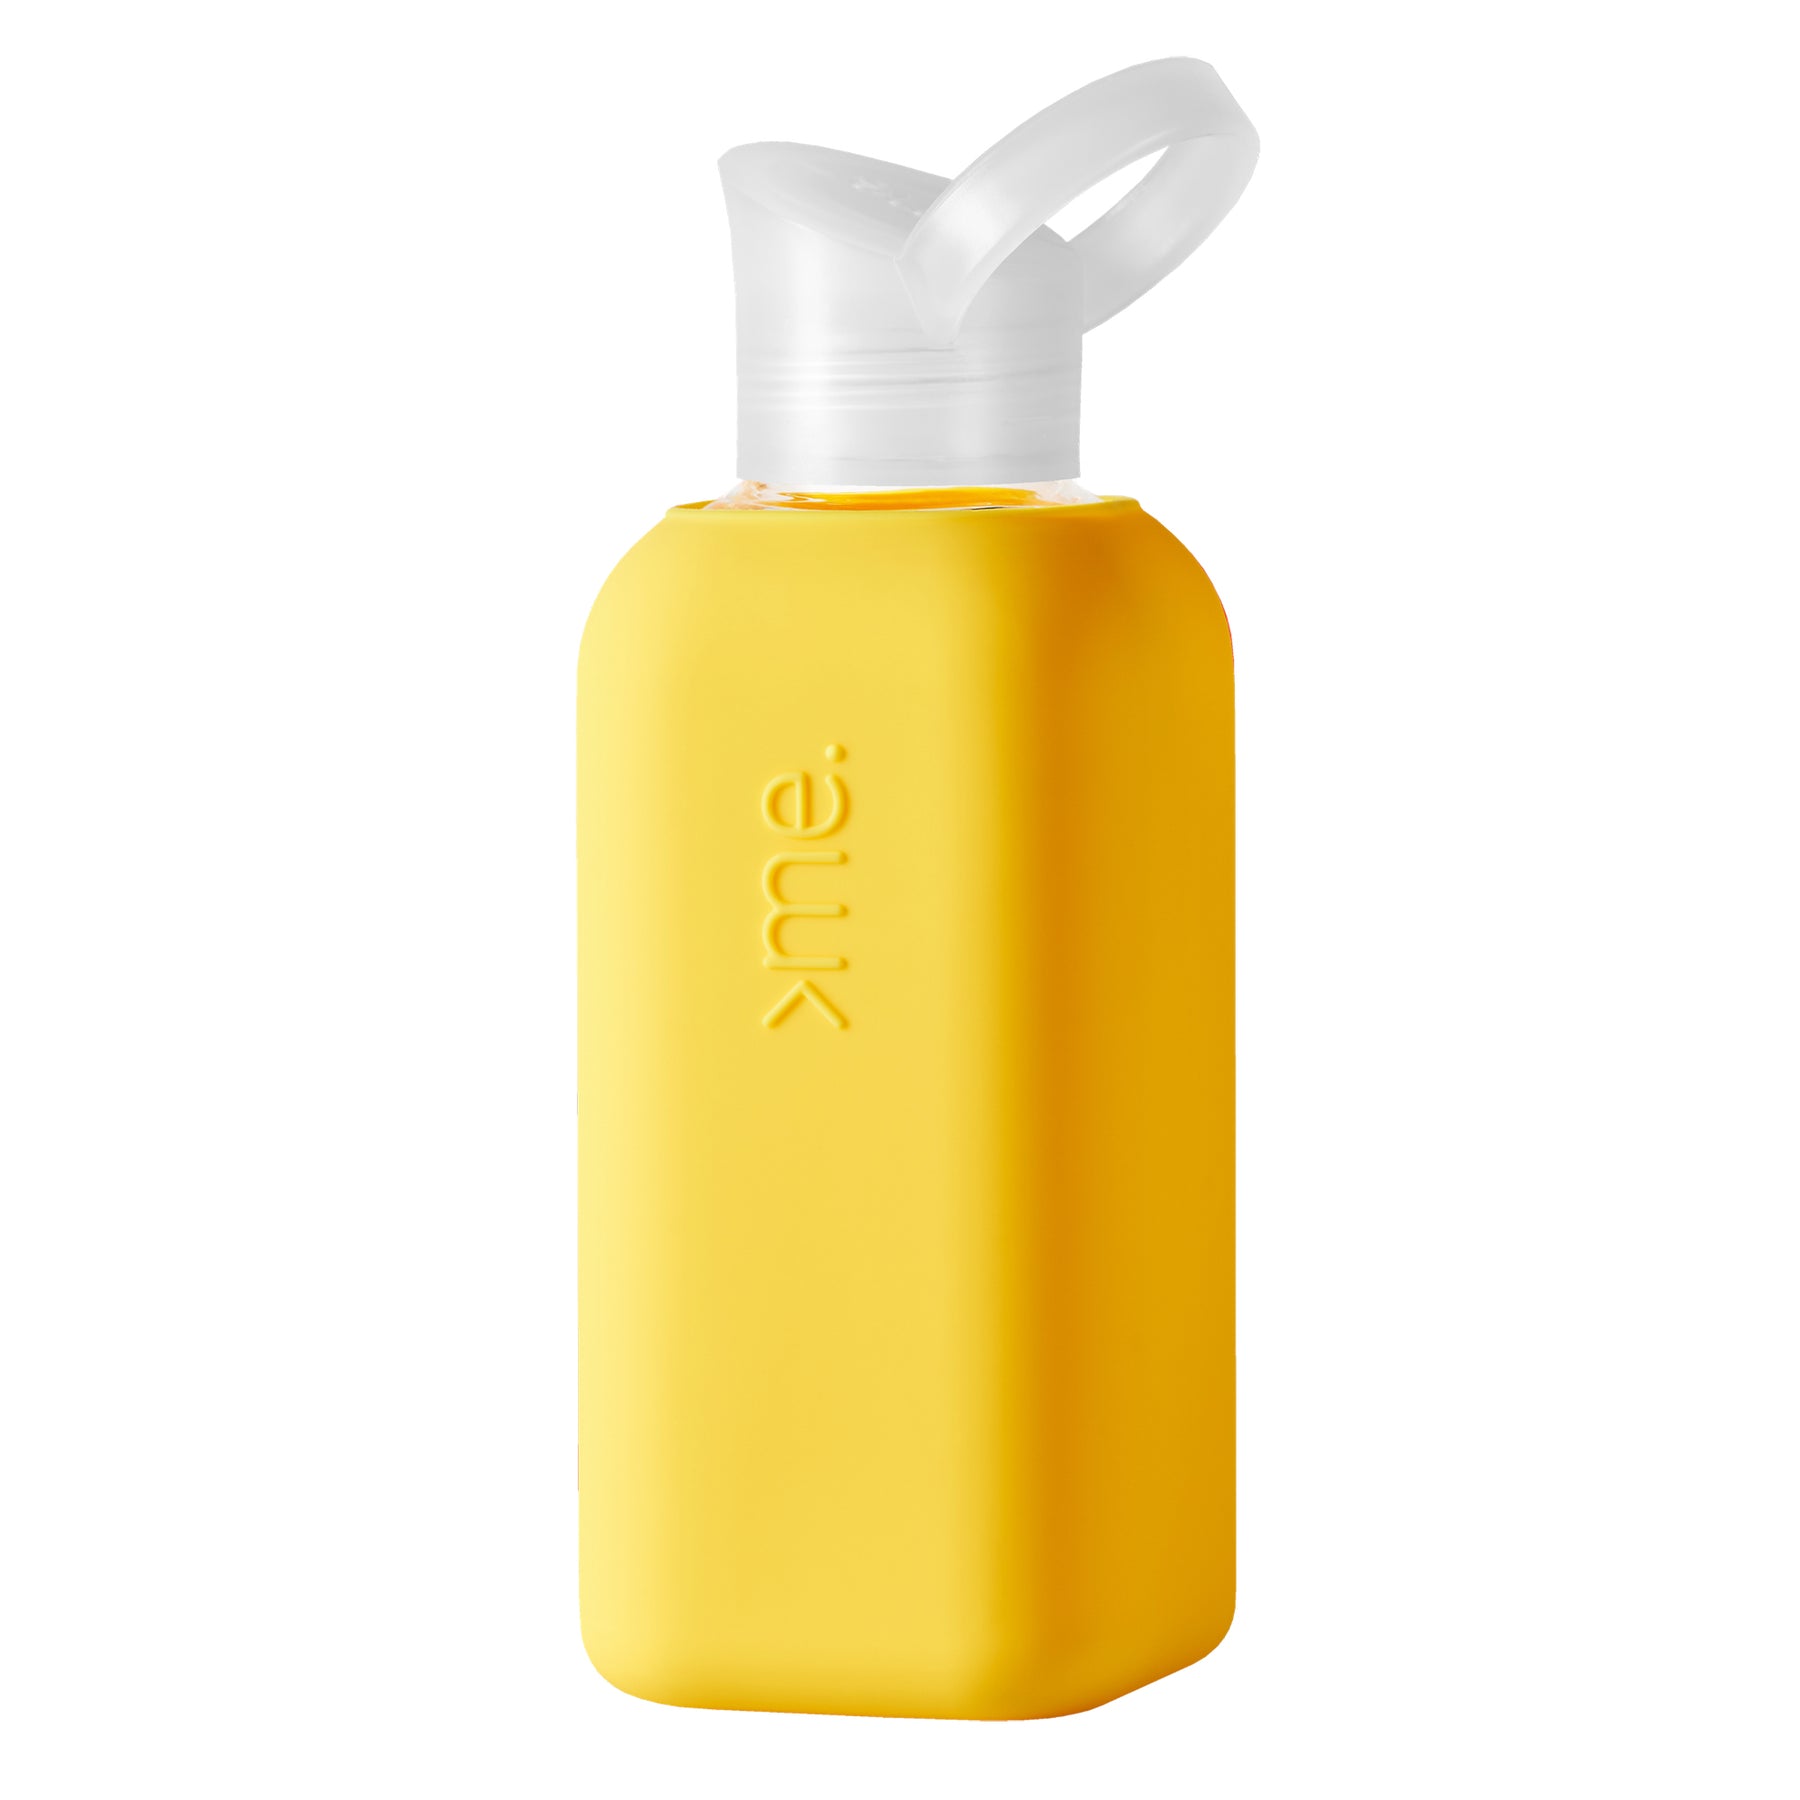 Squireme - Glass Silicon Bottle Blue